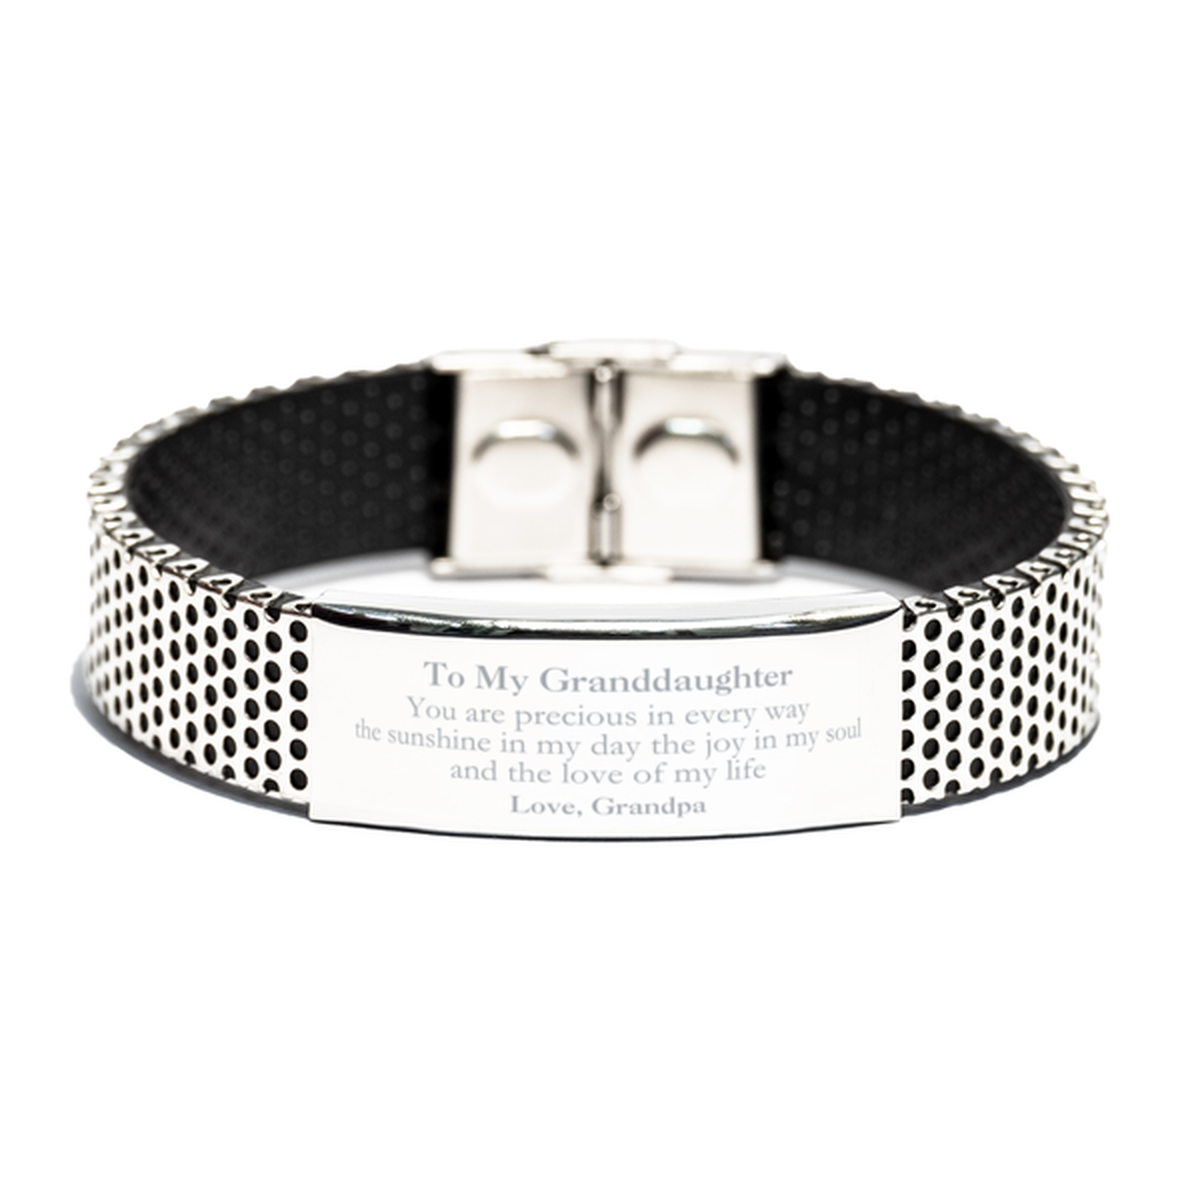 Graduation Gifts for Granddaughter Stainless Steel Bracelet Present from Grandpa, Christmas Granddaughter Birthday Gifts Granddaughter You are precious in every way the sunshine in my day. Love, Grandpa